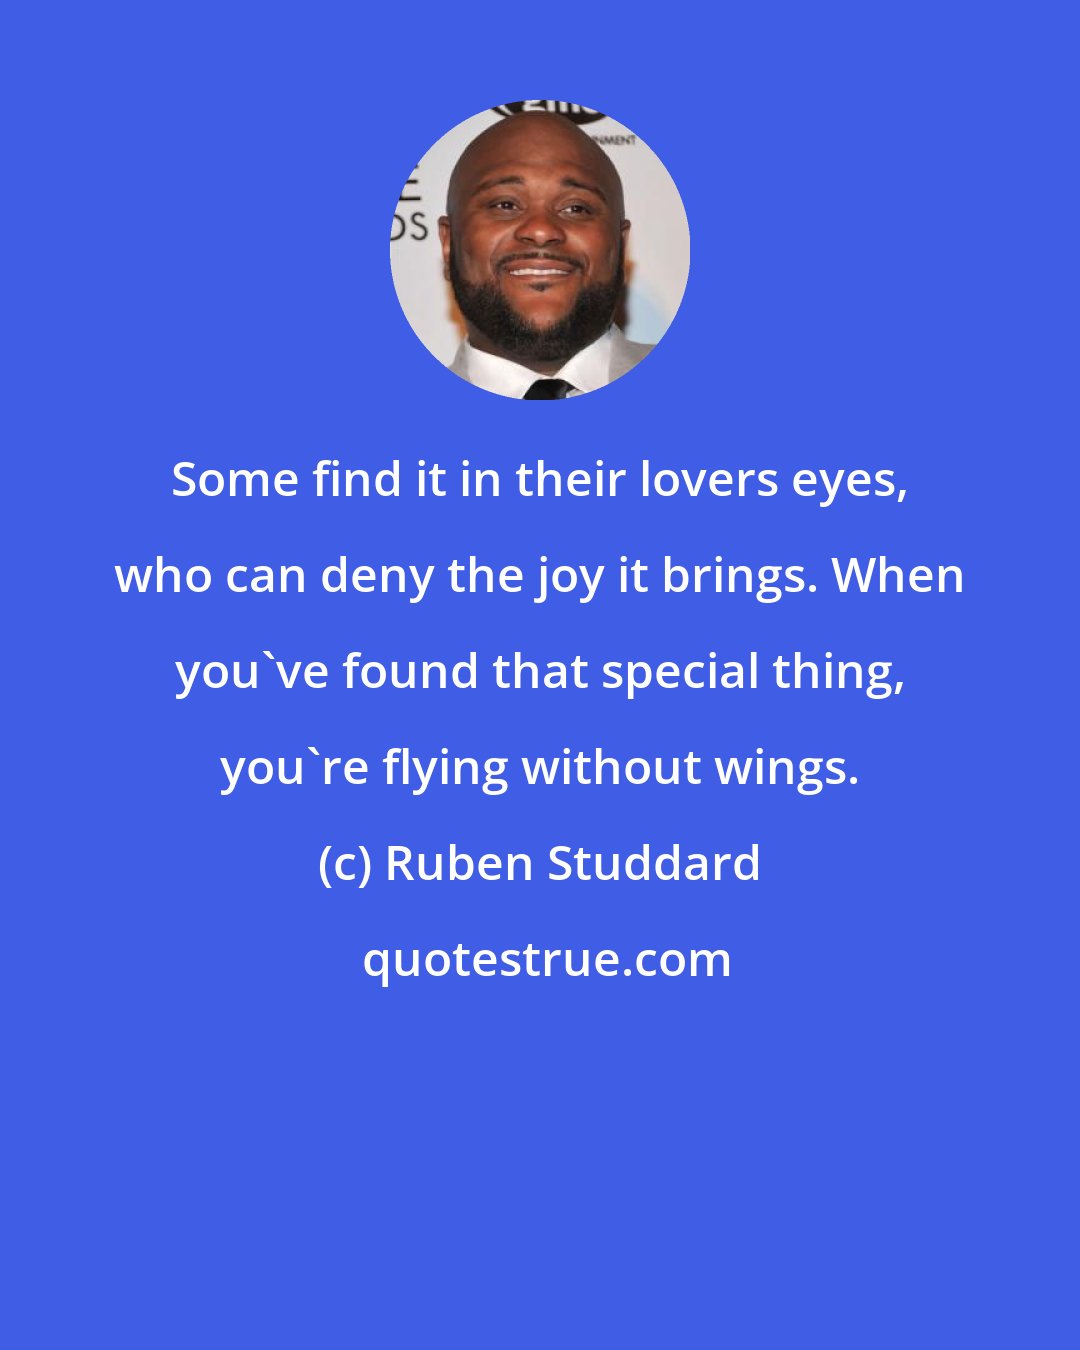 Ruben Studdard: Some find it in their lovers eyes, who can deny the joy it brings. When you've found that special thing, you're flying without wings.